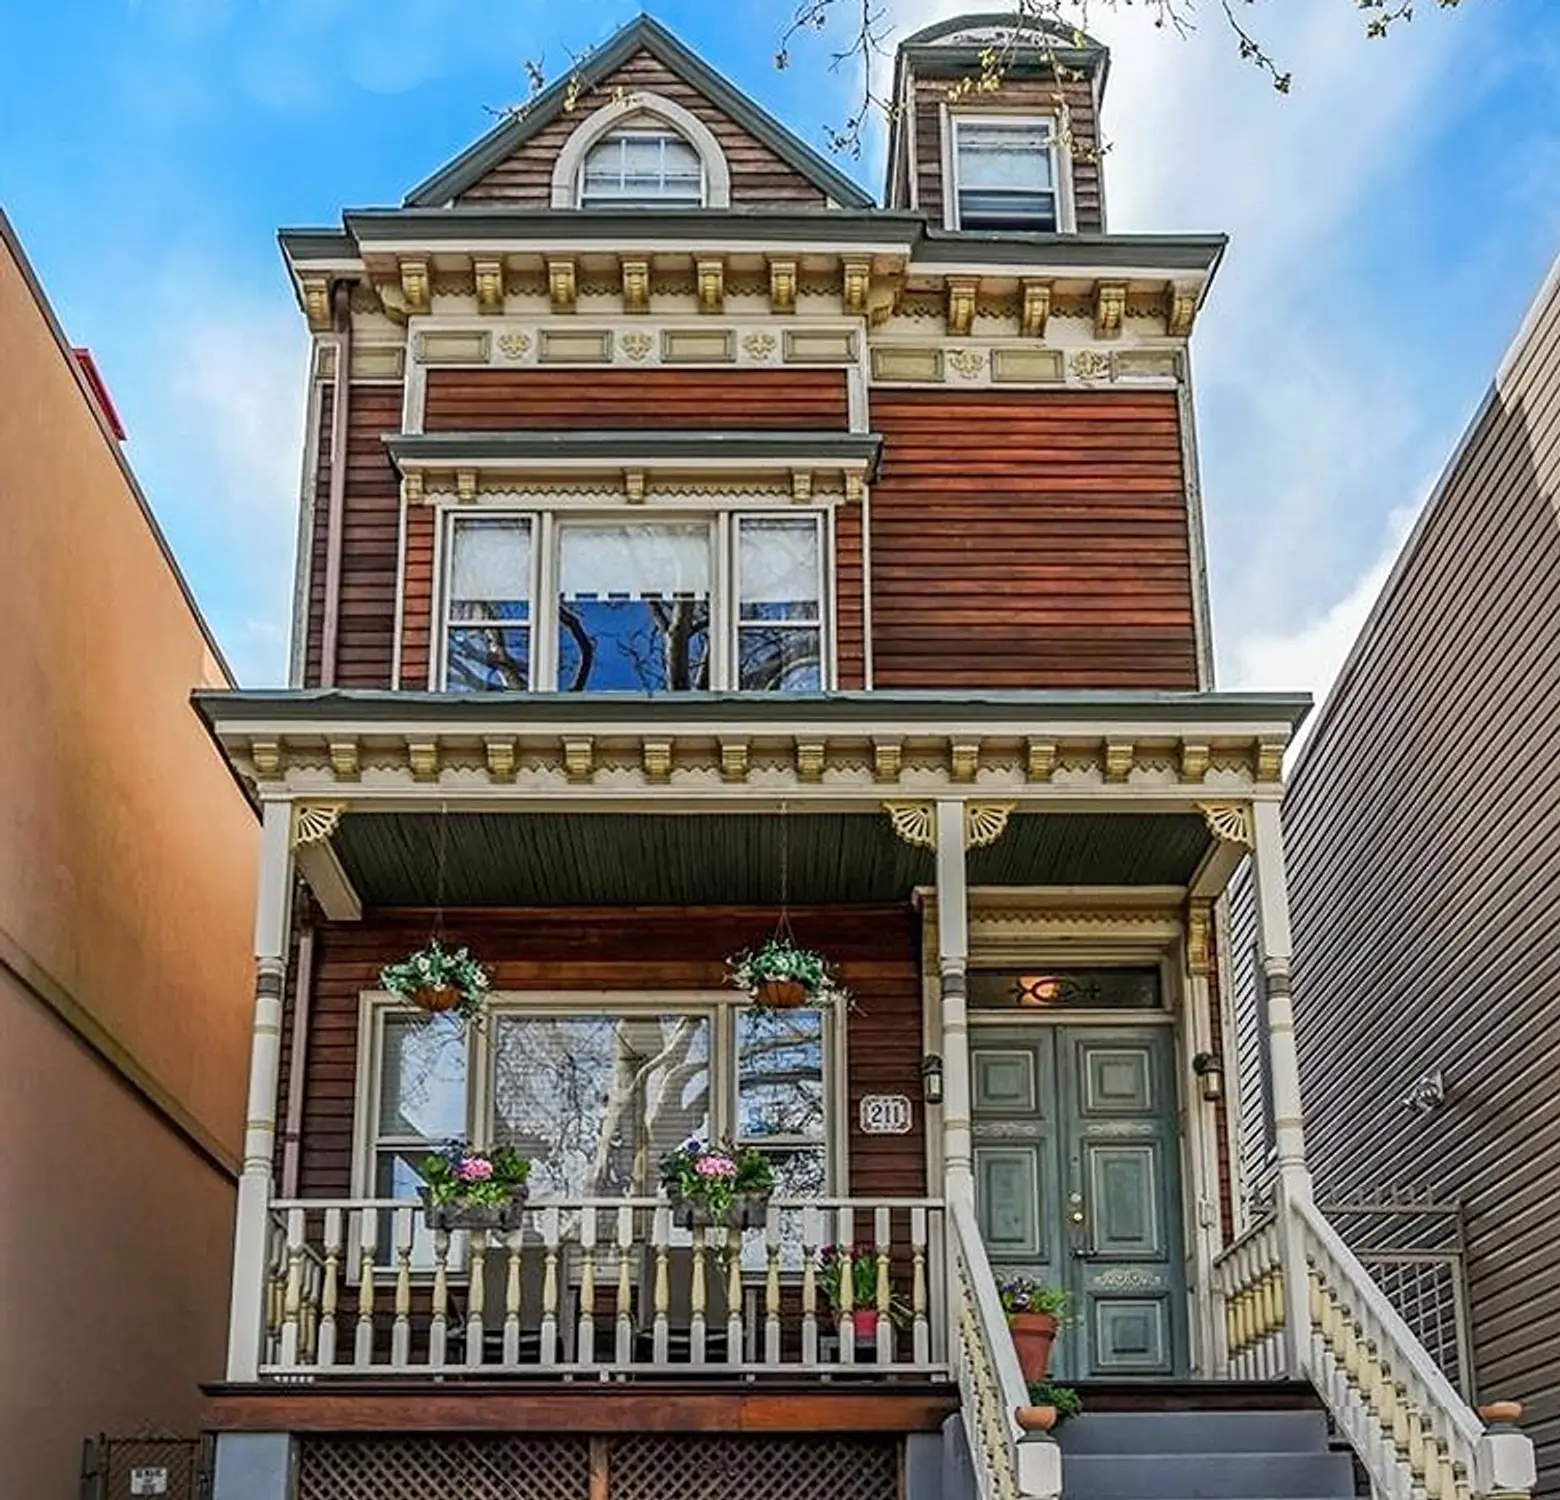 Dubbed ‘the neighborhood’s most charming house’ by the Brooklyn Eagle, this Victorian asks $1.825M